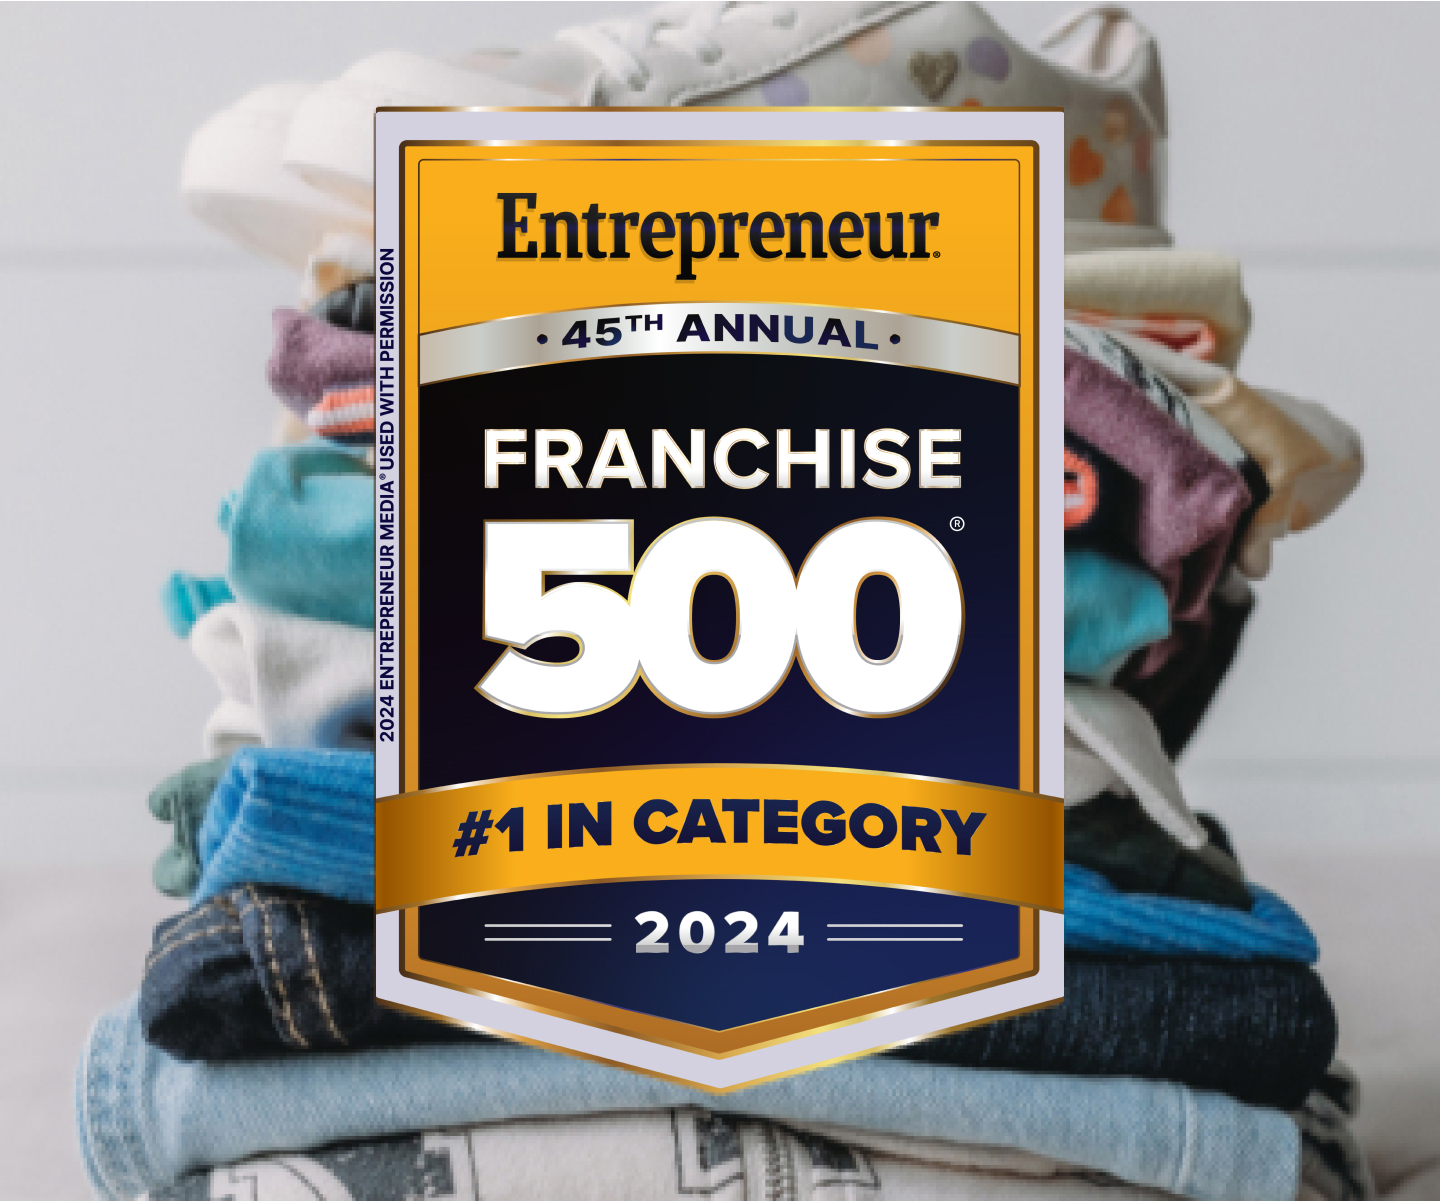 Badge of Franchise 500, #1 in category 2024 with the stack of clothes in background